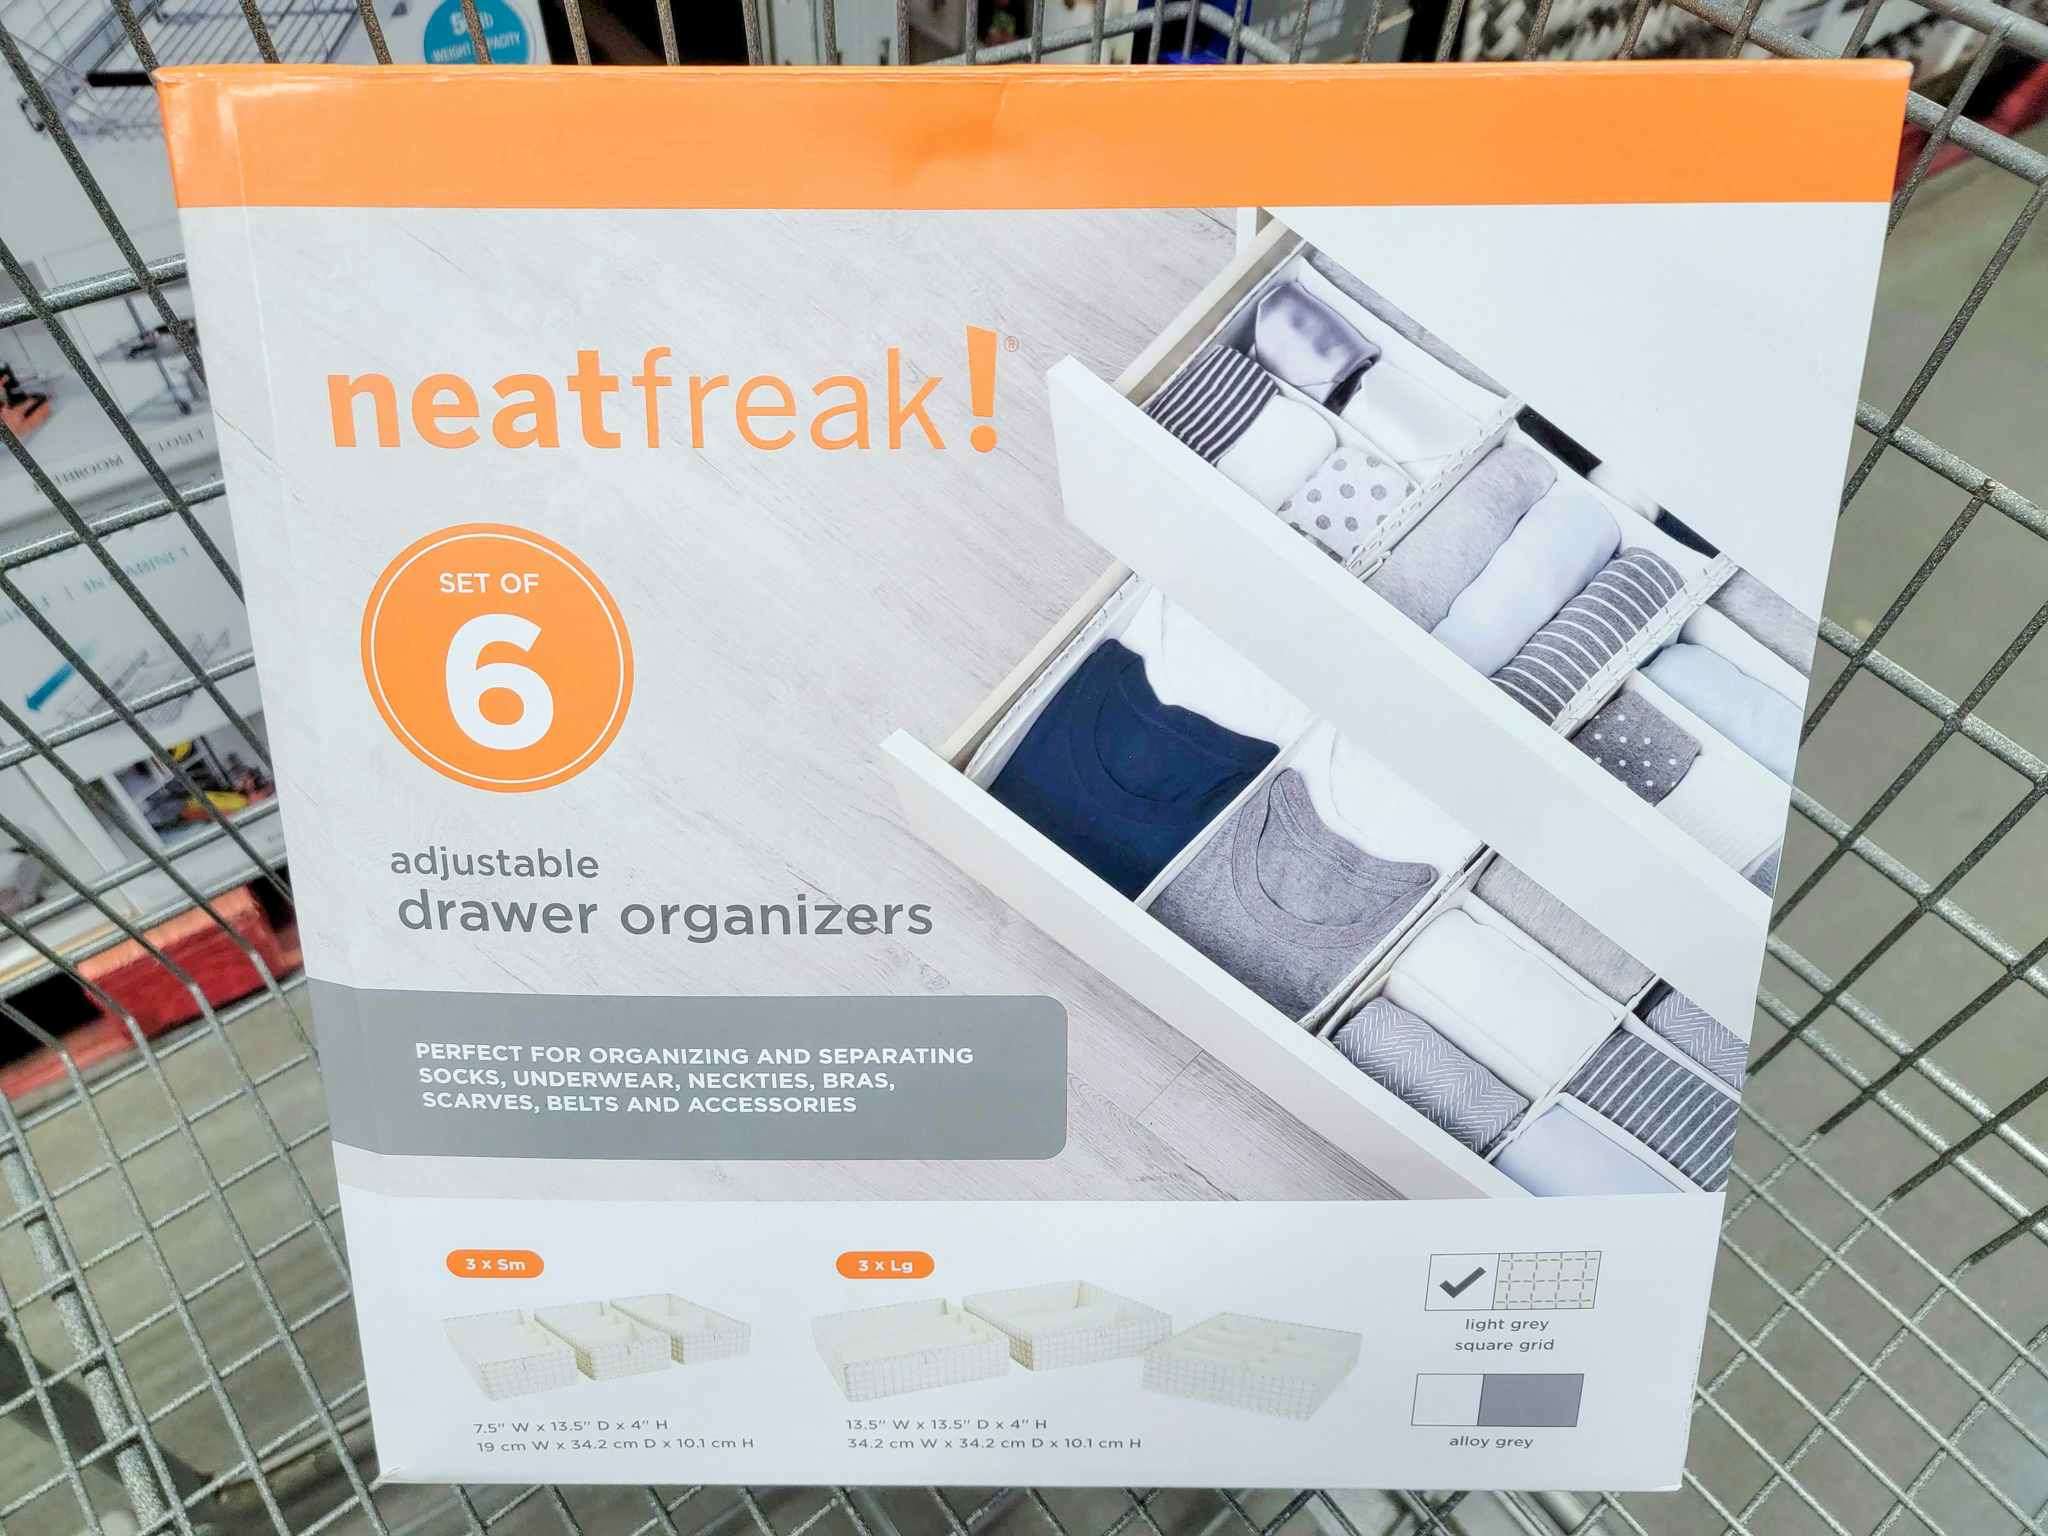 set of 6 drawer organizers in the cart